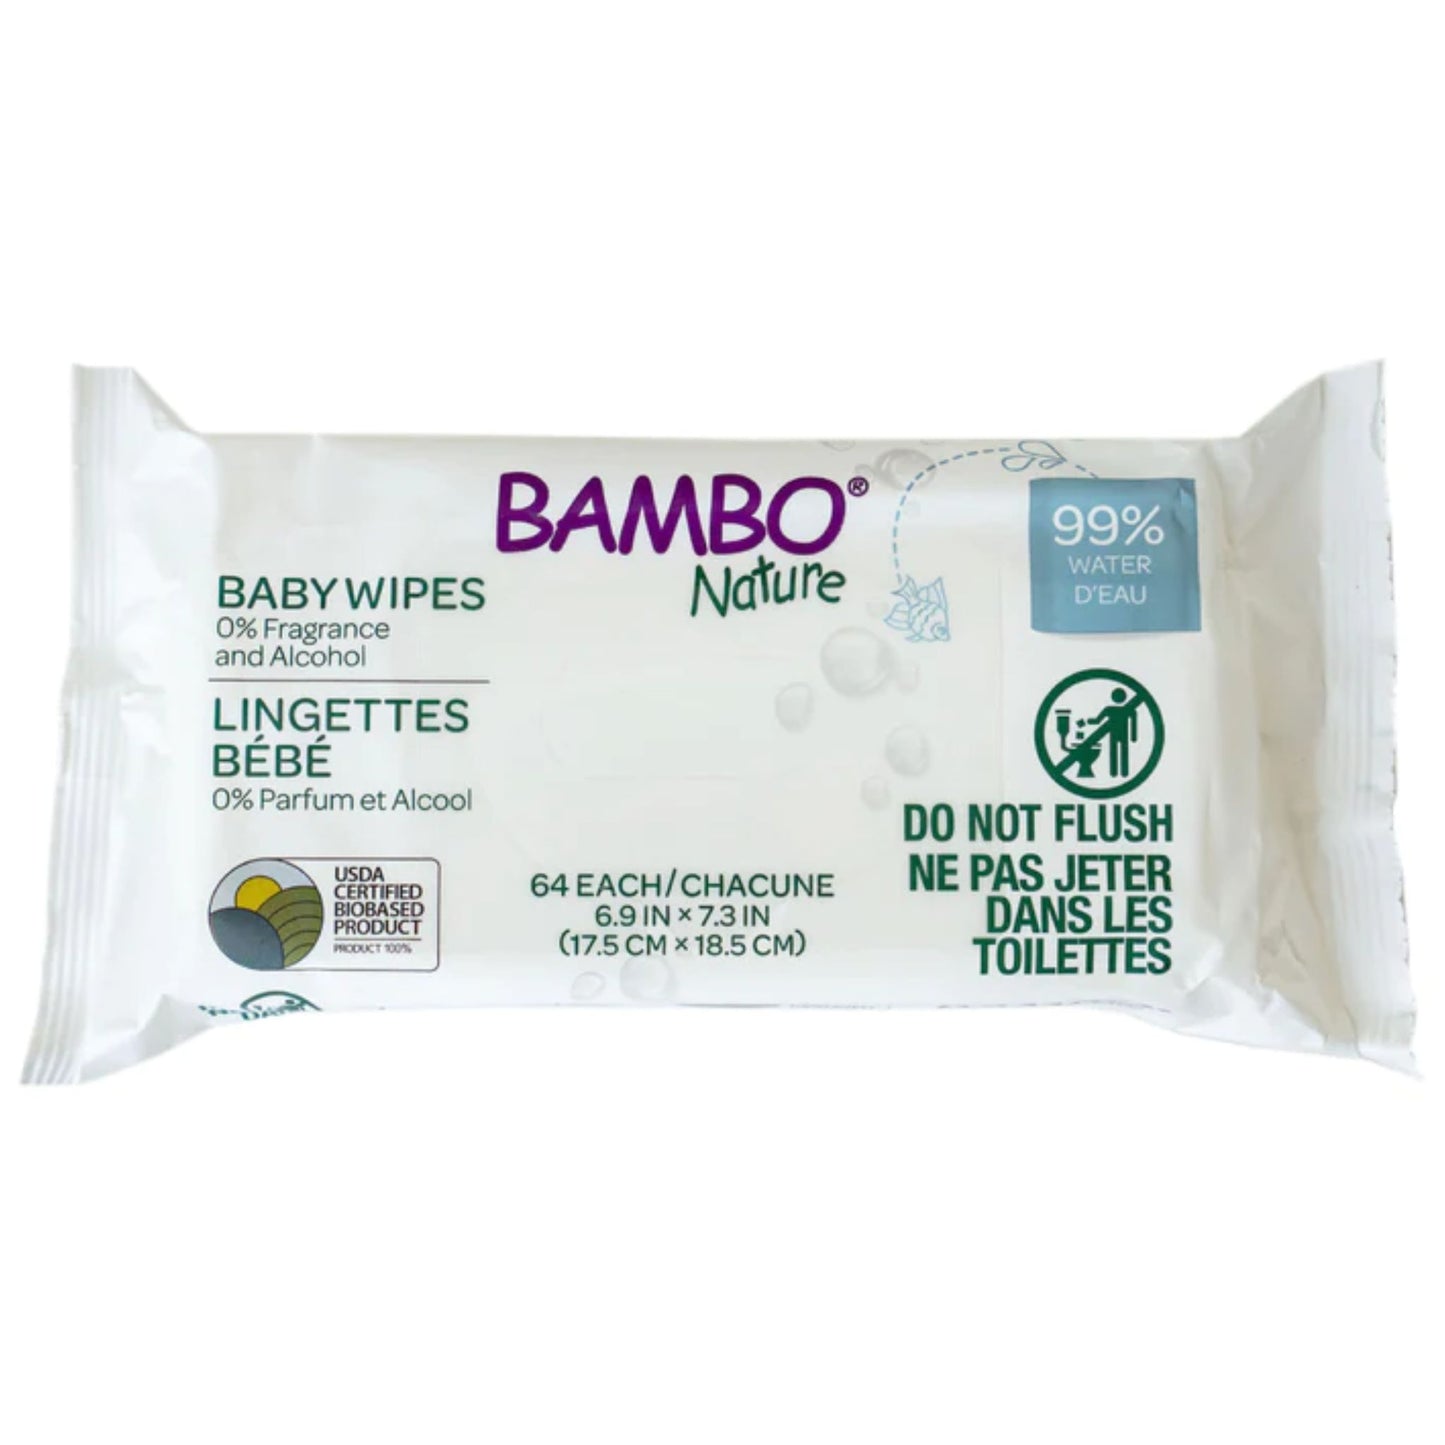 bambo-nature-baby-wipes-single-pack